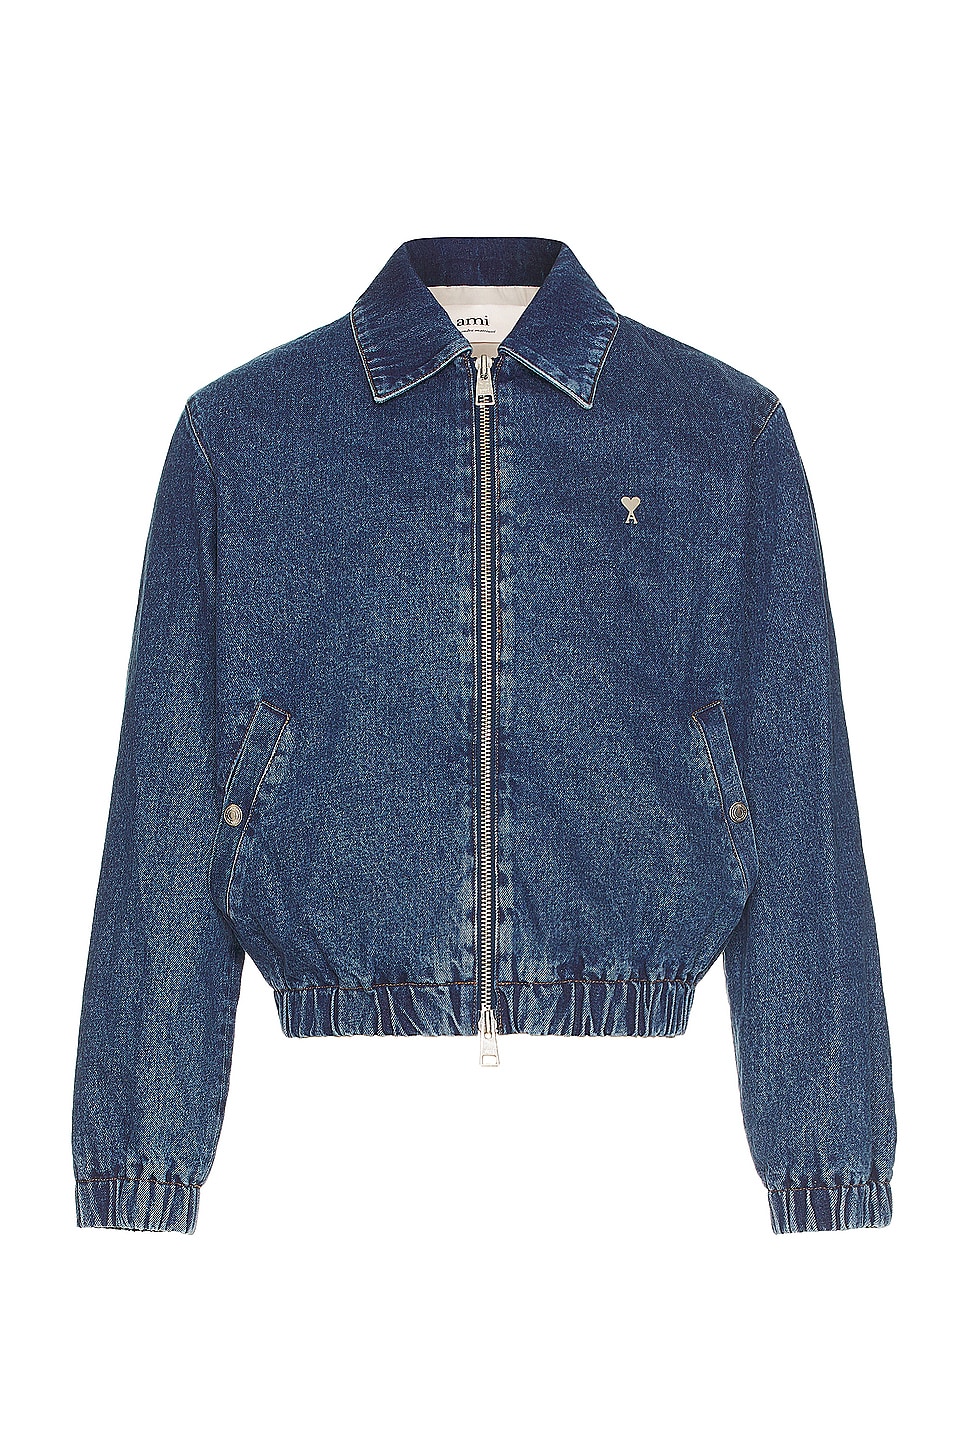 Image 1 of ami ADC Zipper Jacket in Used Blue